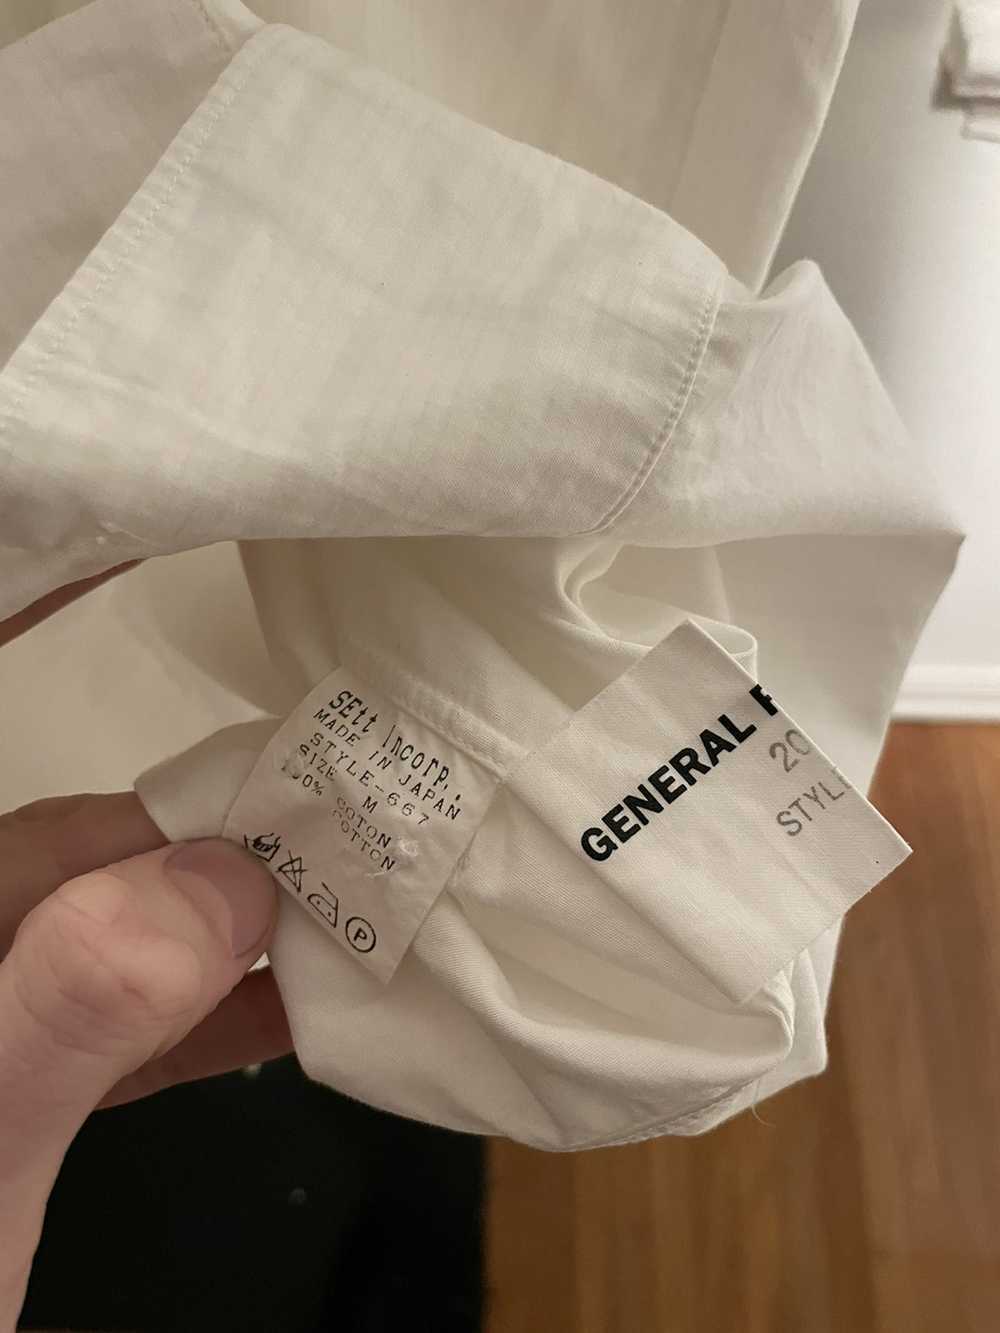 General Research 2000 Velcro Pocket Shirt - image 4